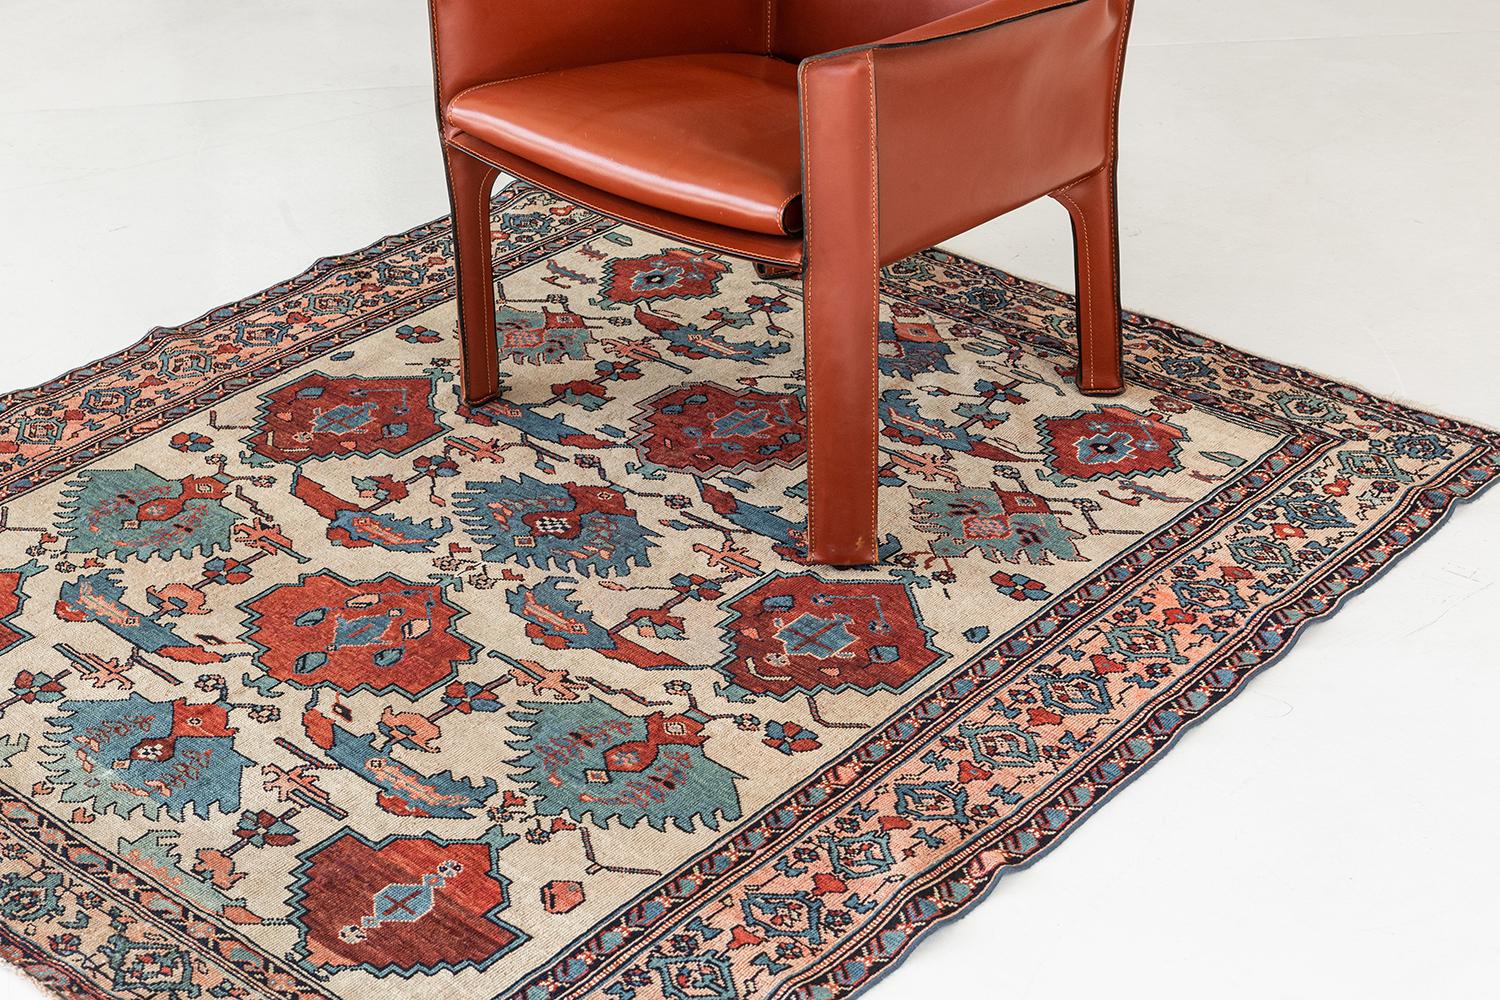 This majestic Malayer rug comes from a handmade finest wool that features ruby and cerulean blue motifs and medallions in a pale caramel field. A sophisticated masterpiece surrounded by a symmetrical leaf scroll, florid designs, and motifs, that